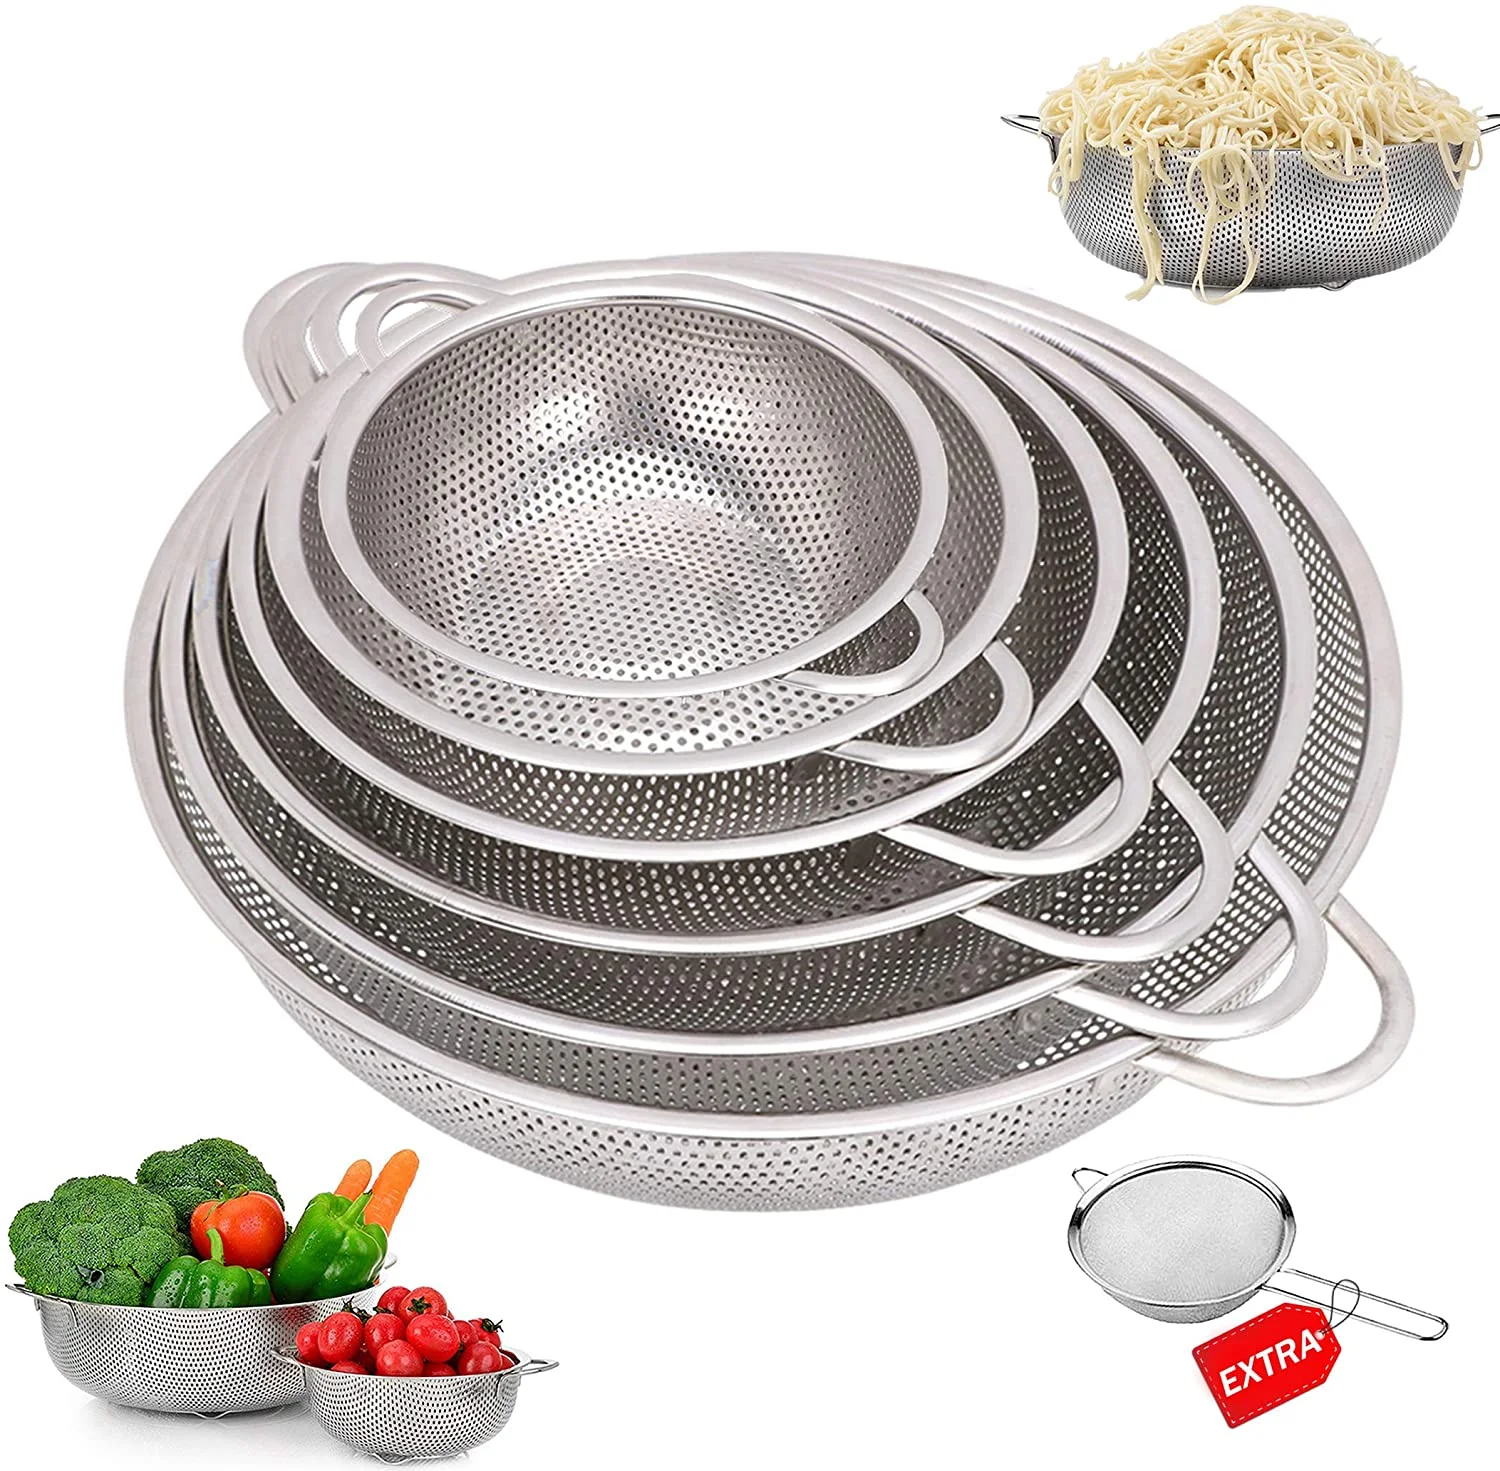 

Kitchen perforated Strainer stainless steel washing food Strainer colander with handles, Silver